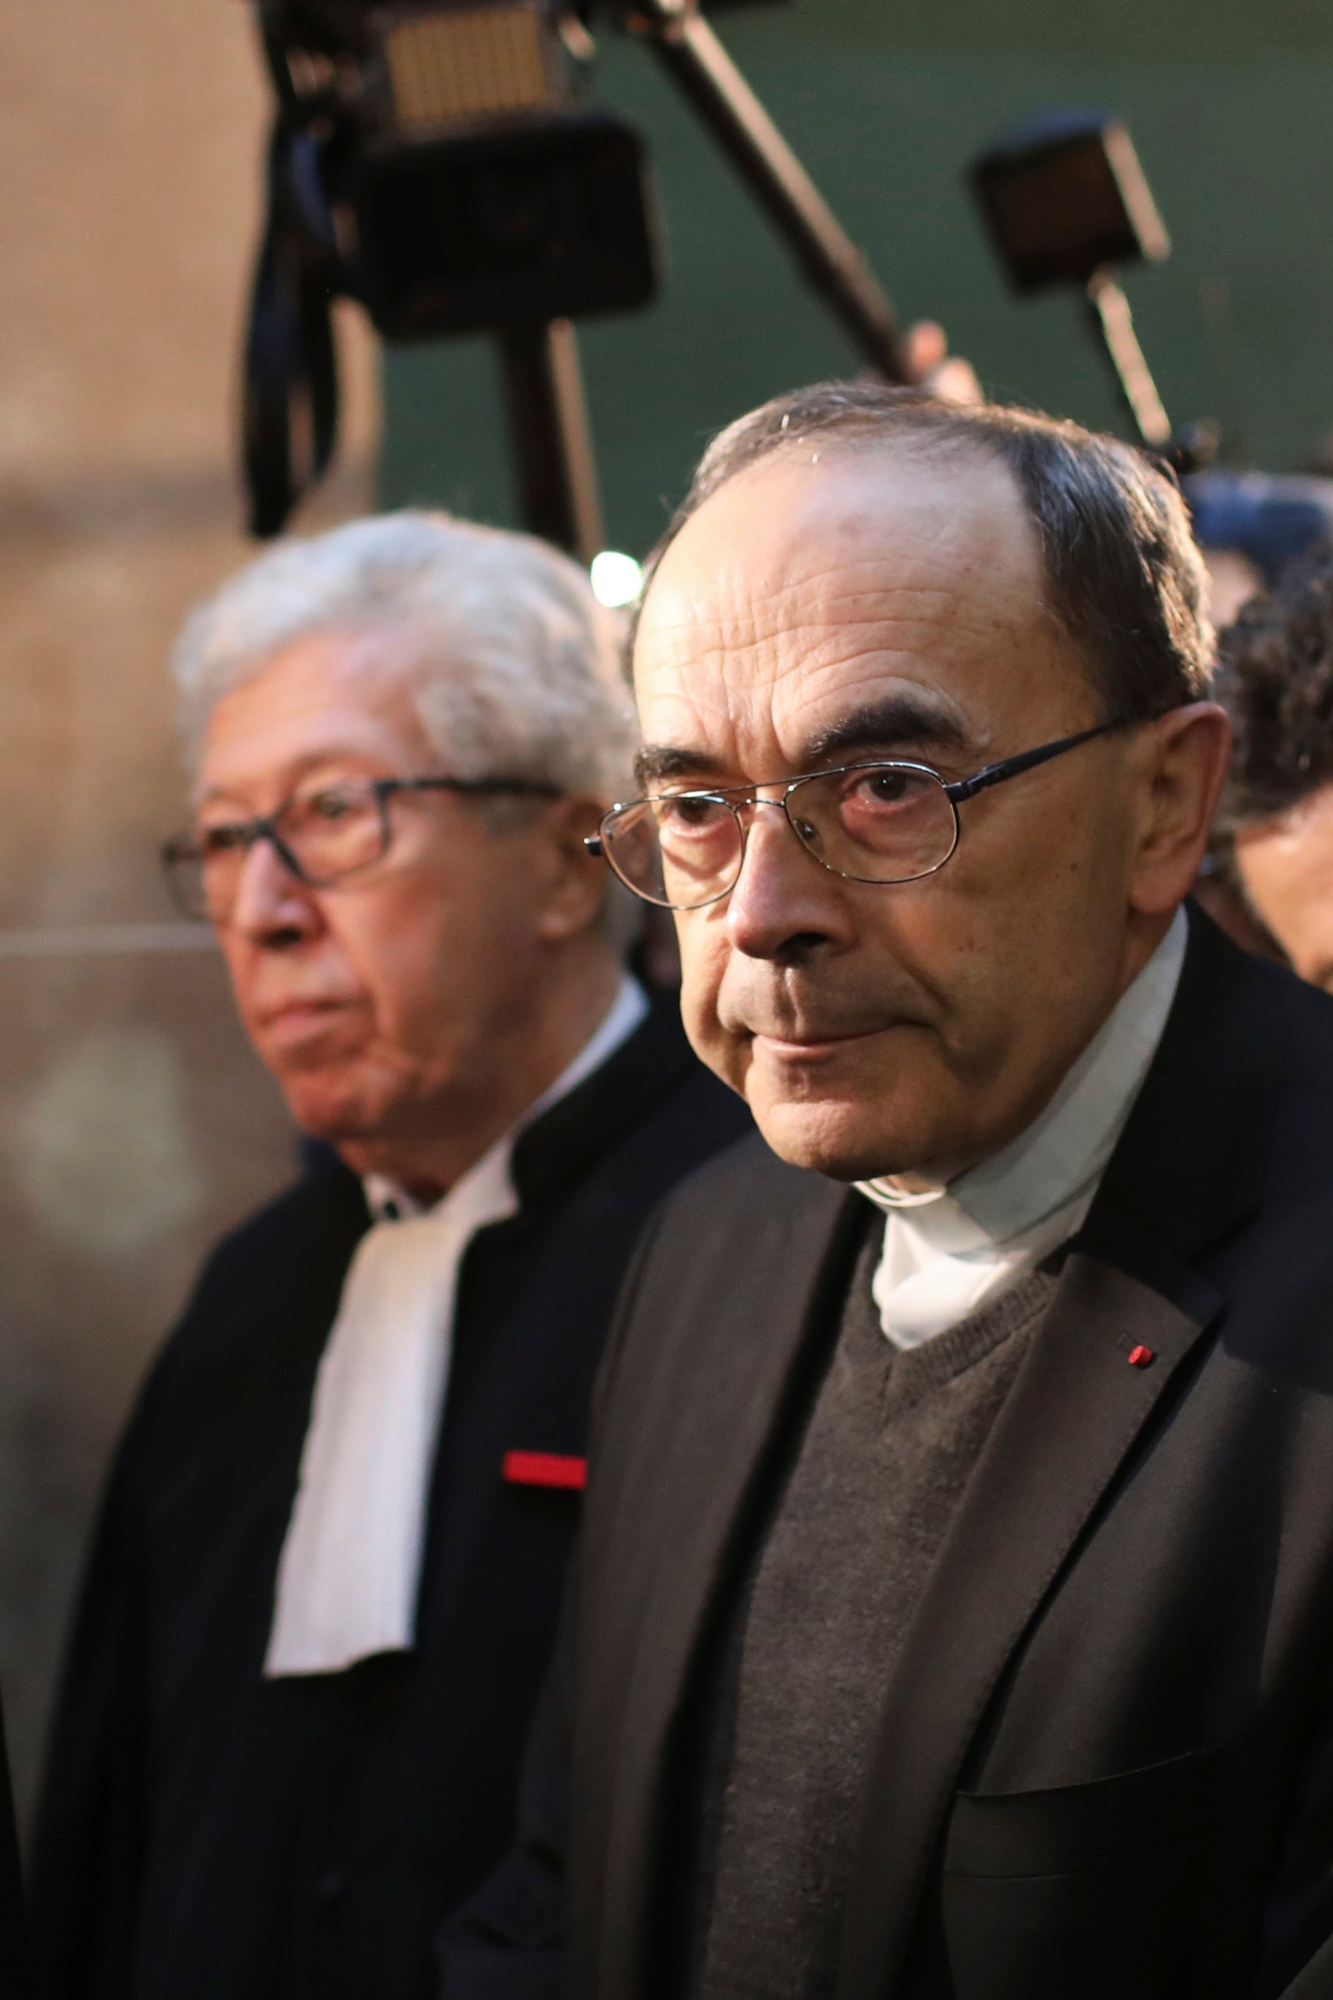 Cardinal Philippe Barbarin, right, arrives at the Lyon courthouse to attend his trial, in Lyon, central France, Monday Jan. 7, 2019. The Roman Catholic Church faces another public reckoning when a French cardinal, Philippe Barbarin, goes on trial Monday for his alleged failure to report a pedophile priest who confessed to preying on Boy Scouts and whose victims want to hold one of France's highest church figures accountable. (AP Photo/Laurent Cipriani) France Church Sex Abuse